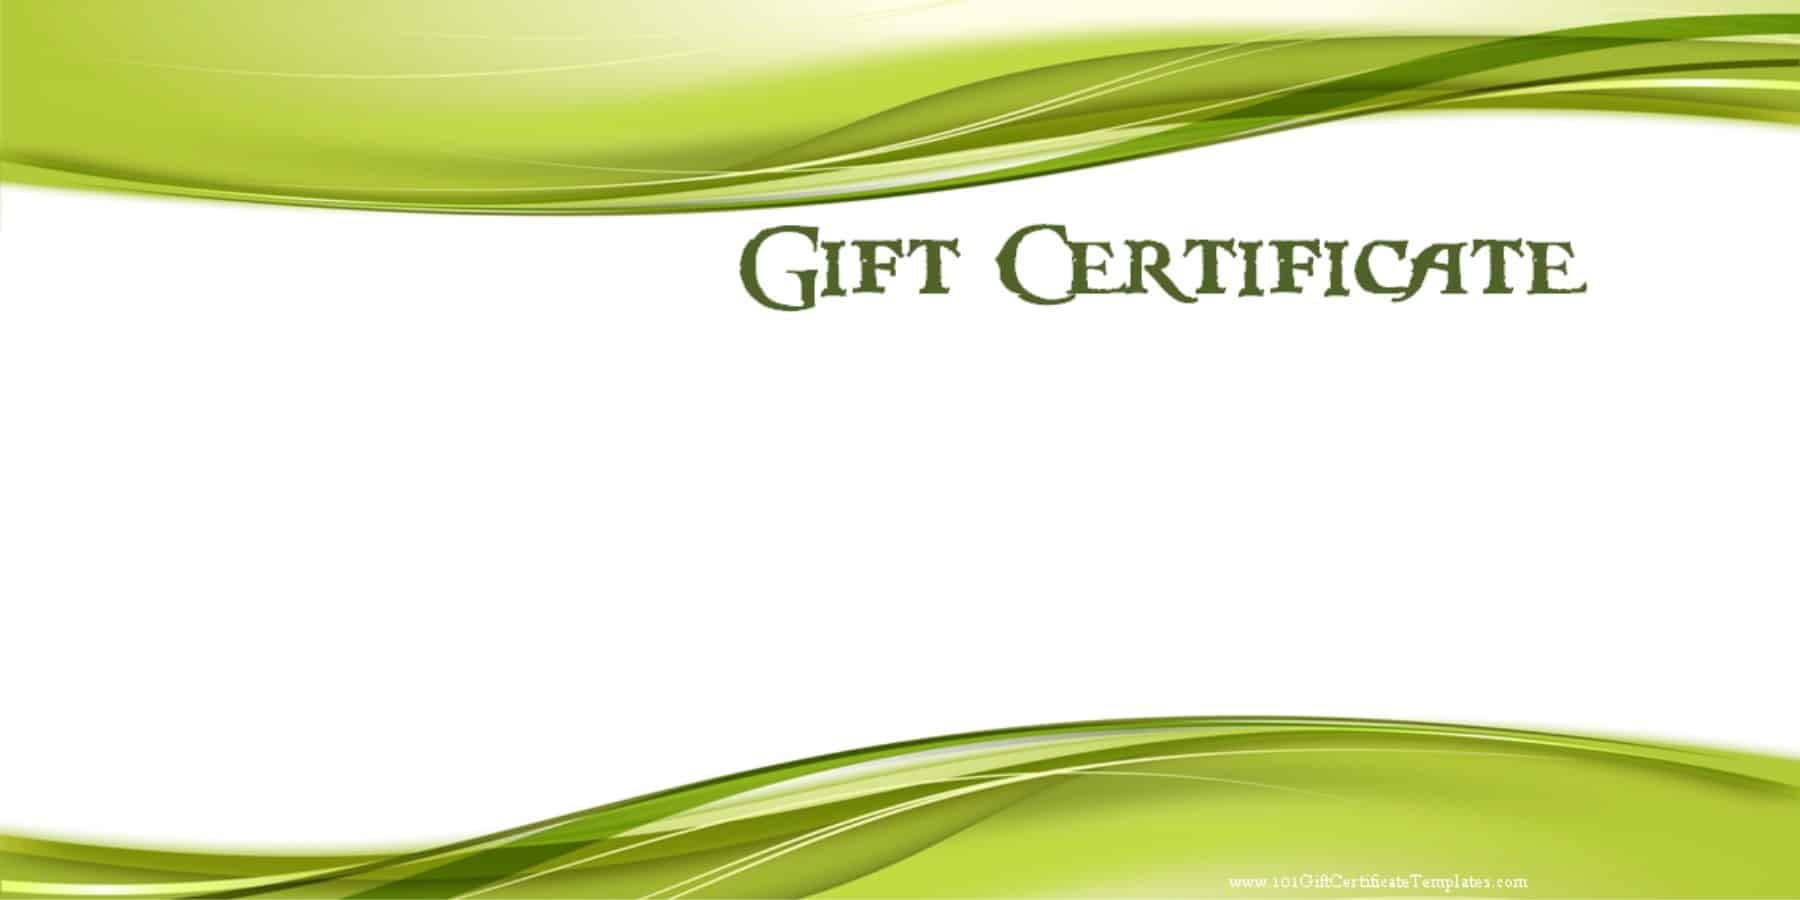 blank gift certificate which can be customized